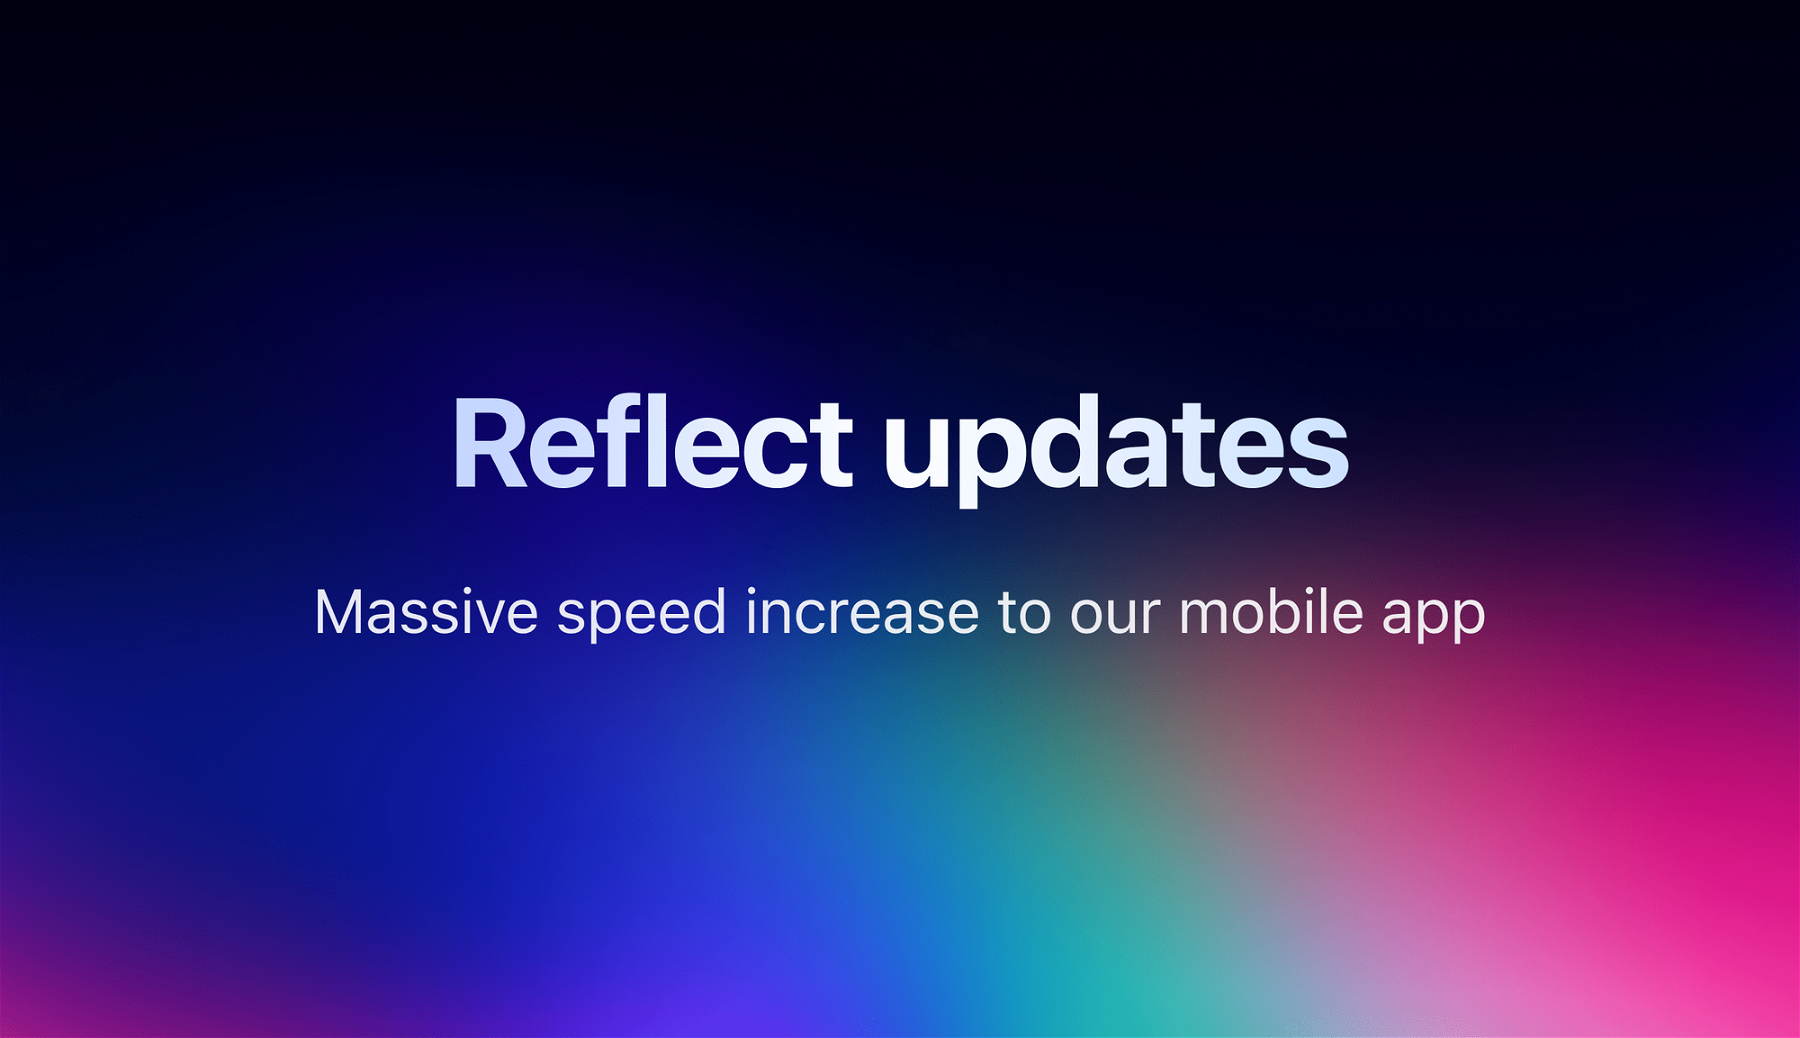 Massive speed increase to our mobile app